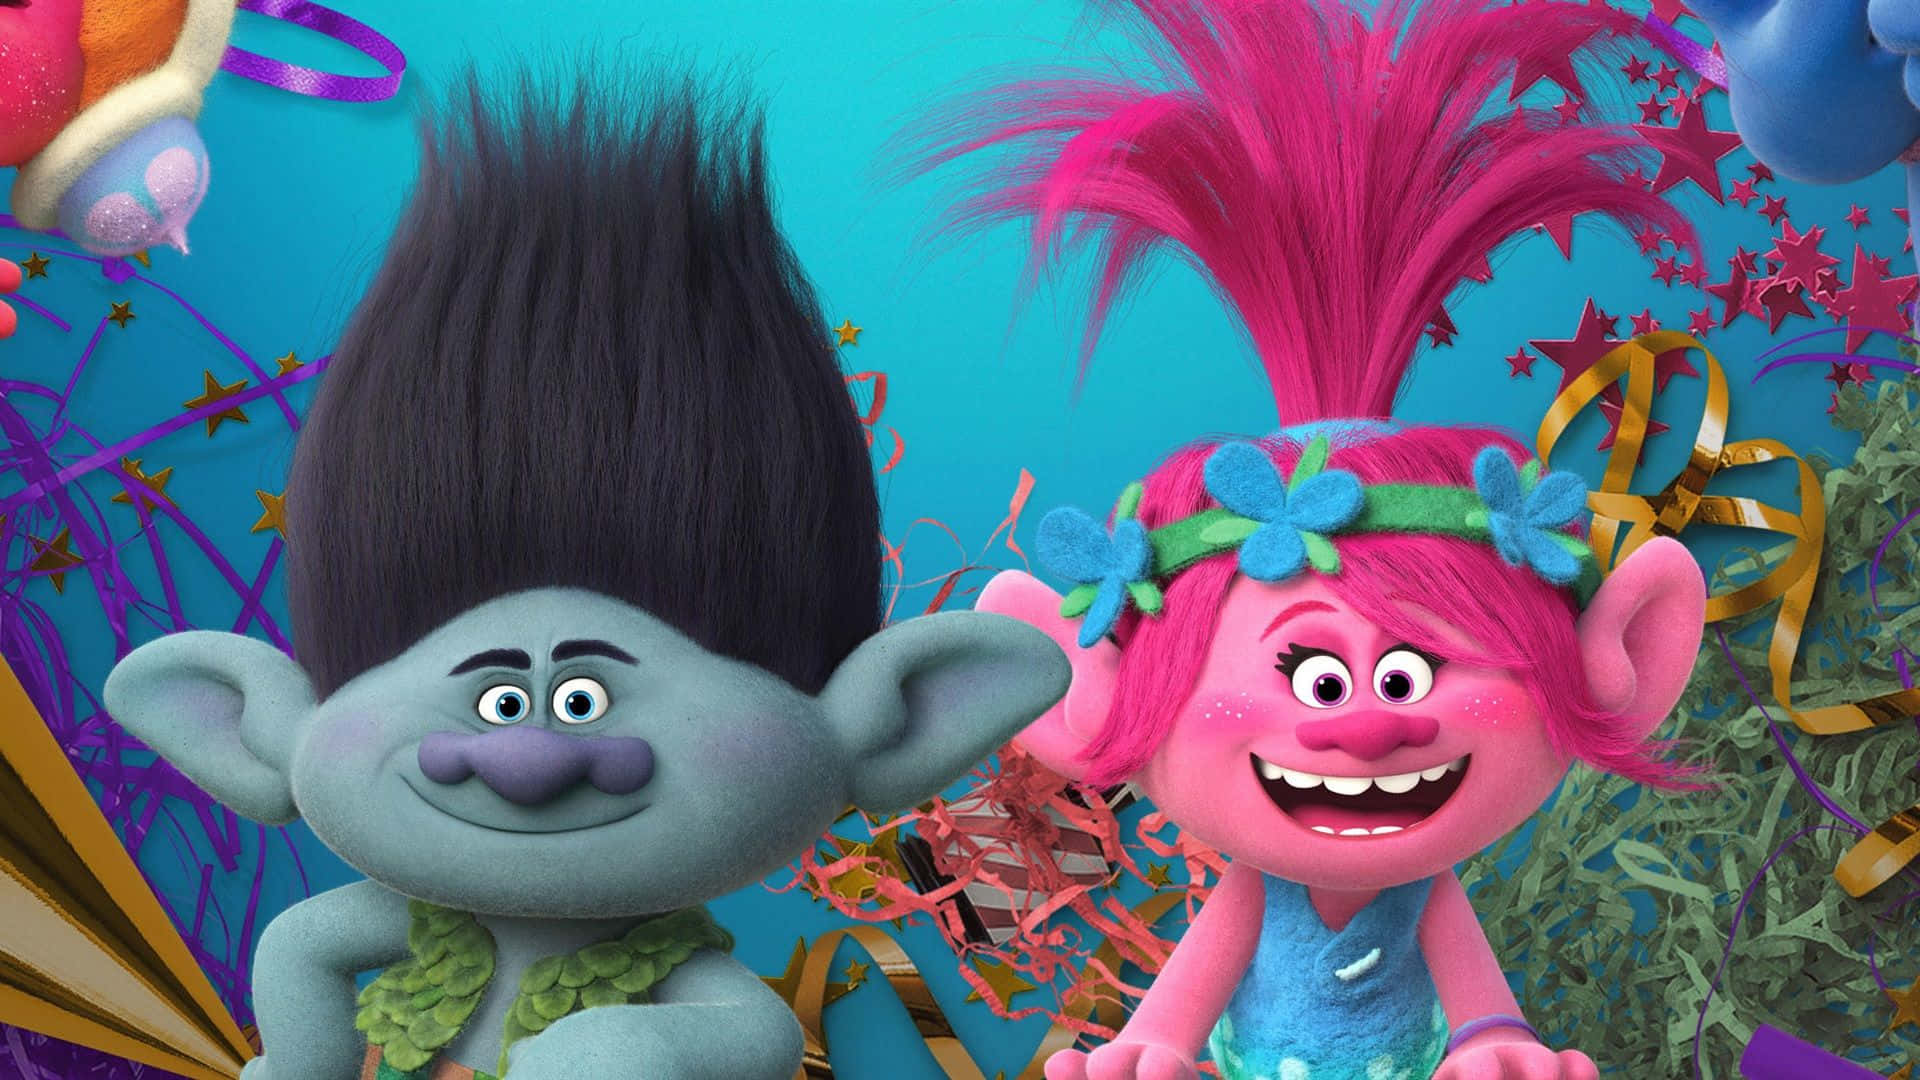 Enjoy in the bright colors of a fun trolls world.